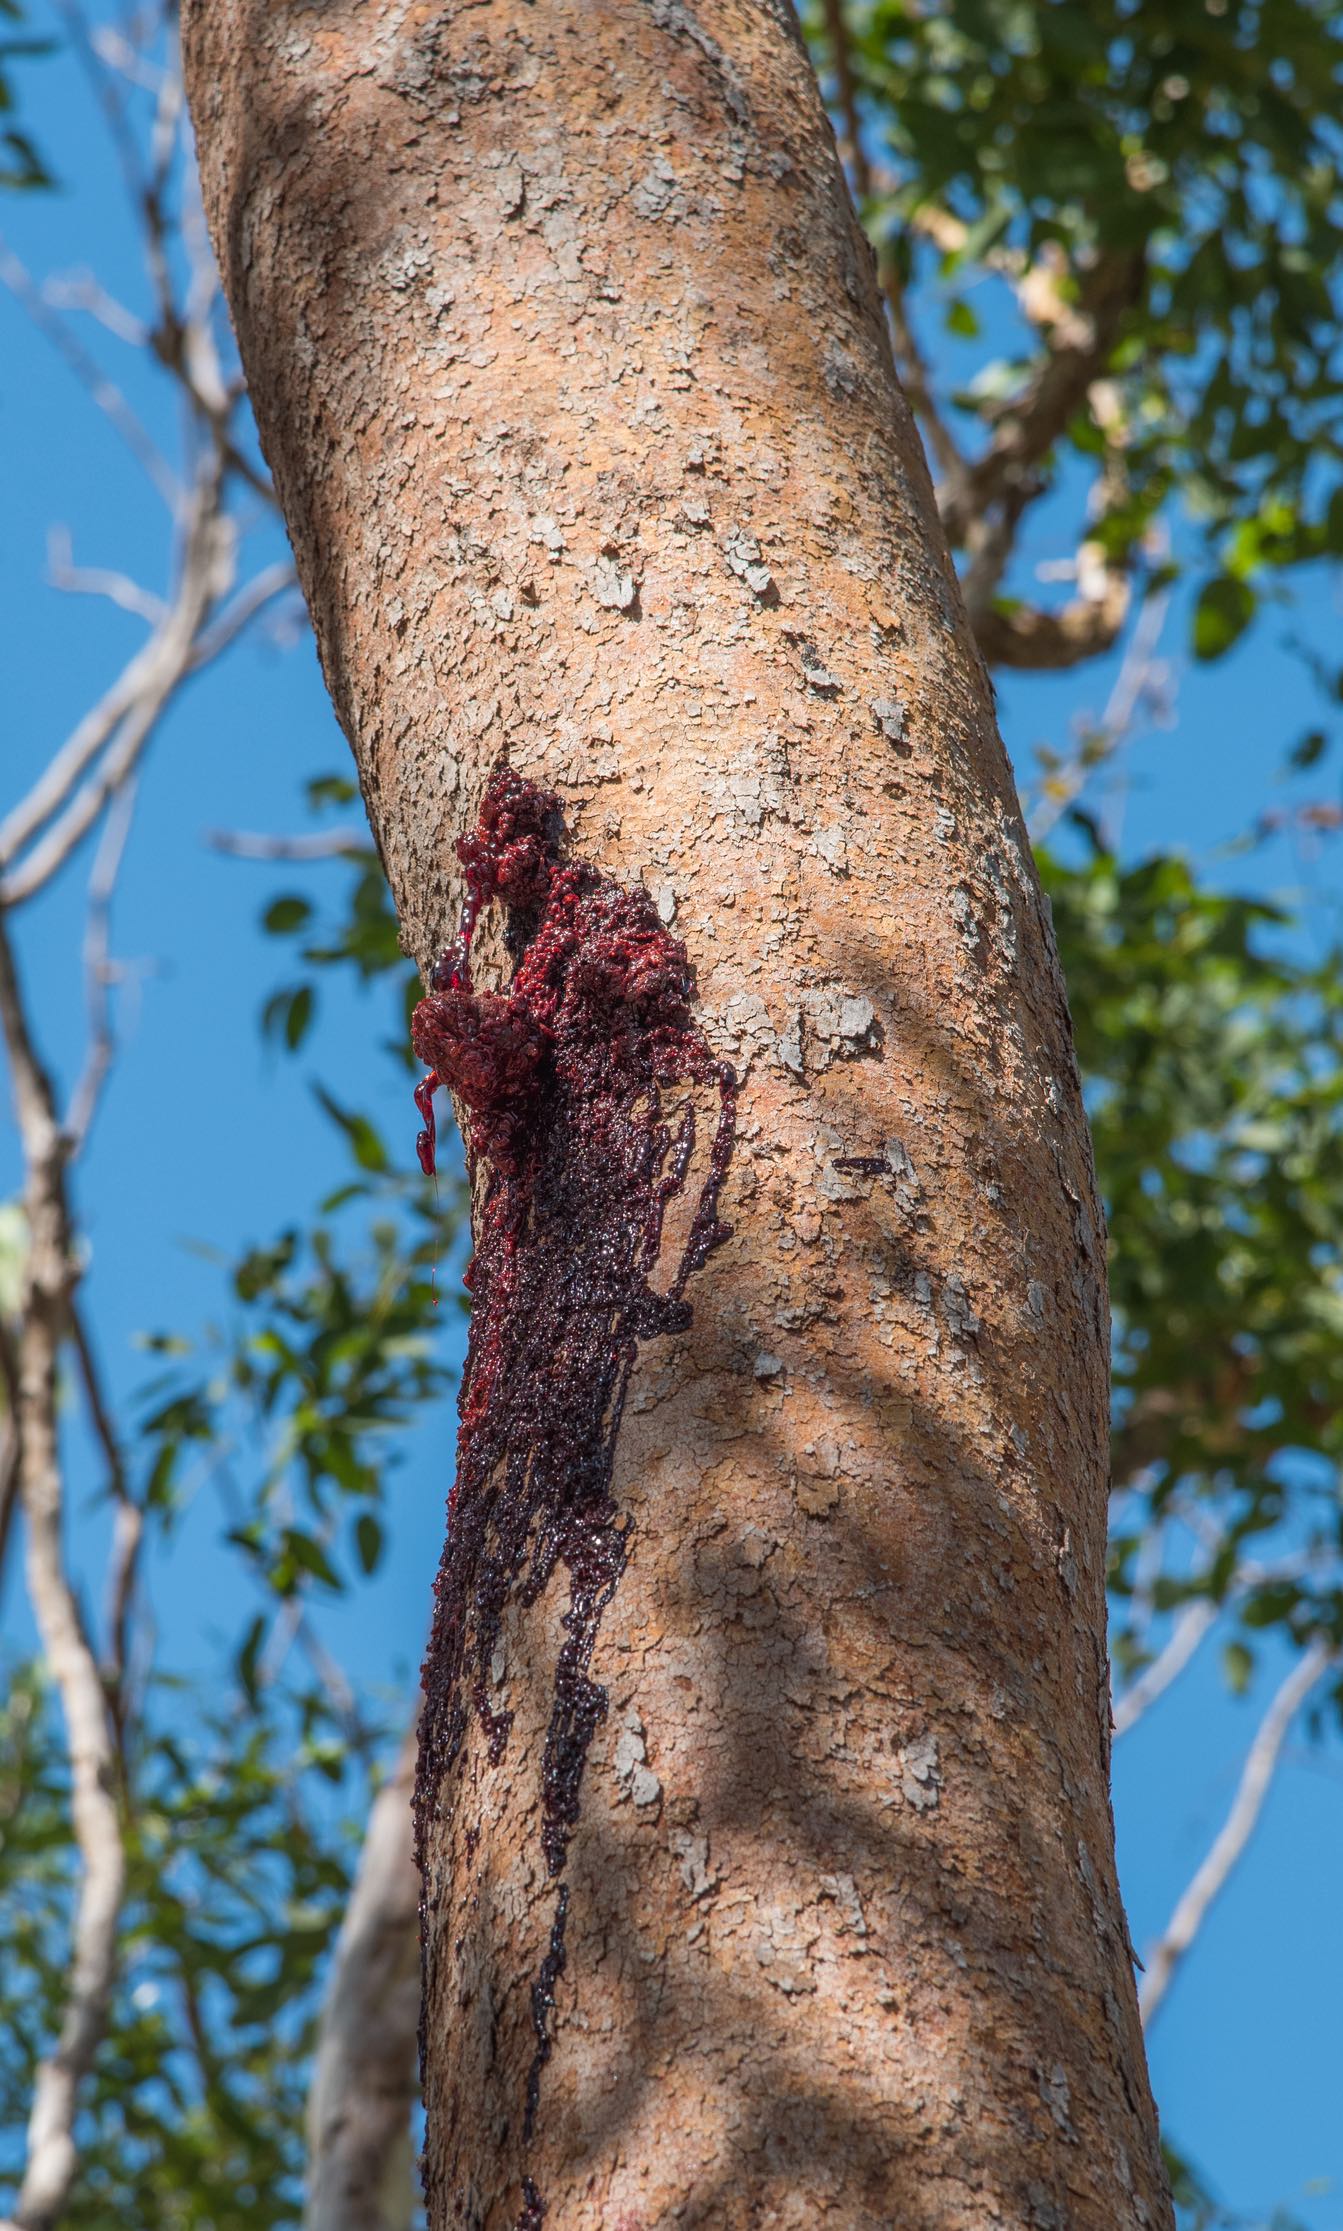 Closeup of bloodwood tree with trunk oozing the vivid red sap on a sunny day in Darwin, Australia